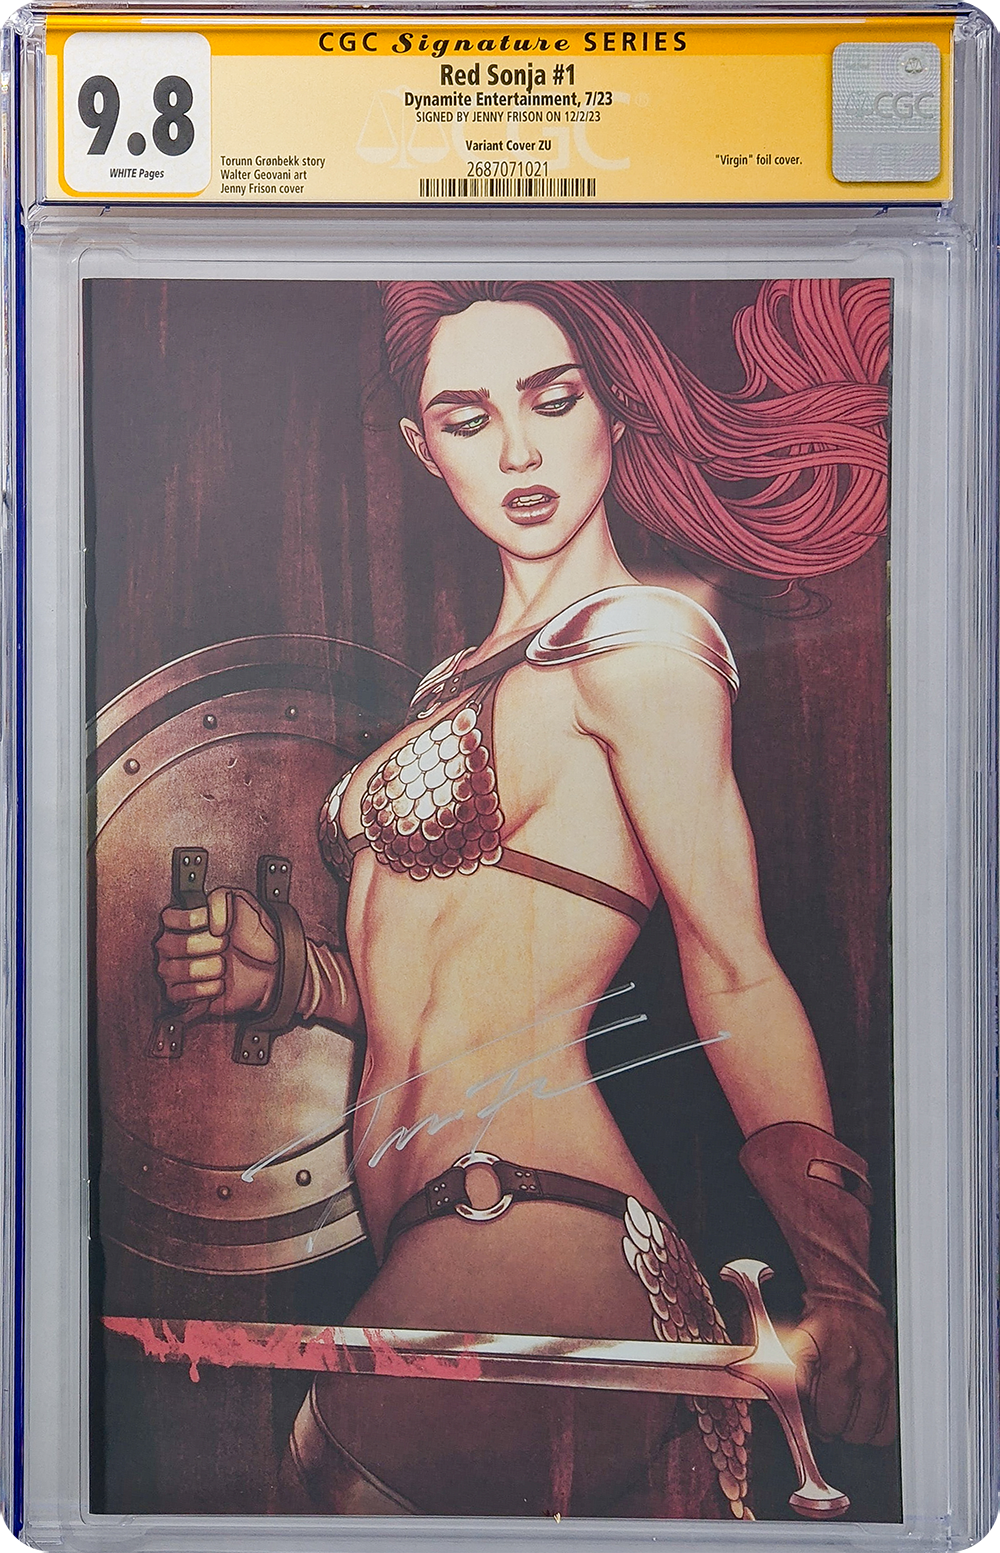 Red Sonja #1 Cover ZU Foil Variant Dynamite Entertainment CGC Signature Series 9.8 Signed Jenny Frison